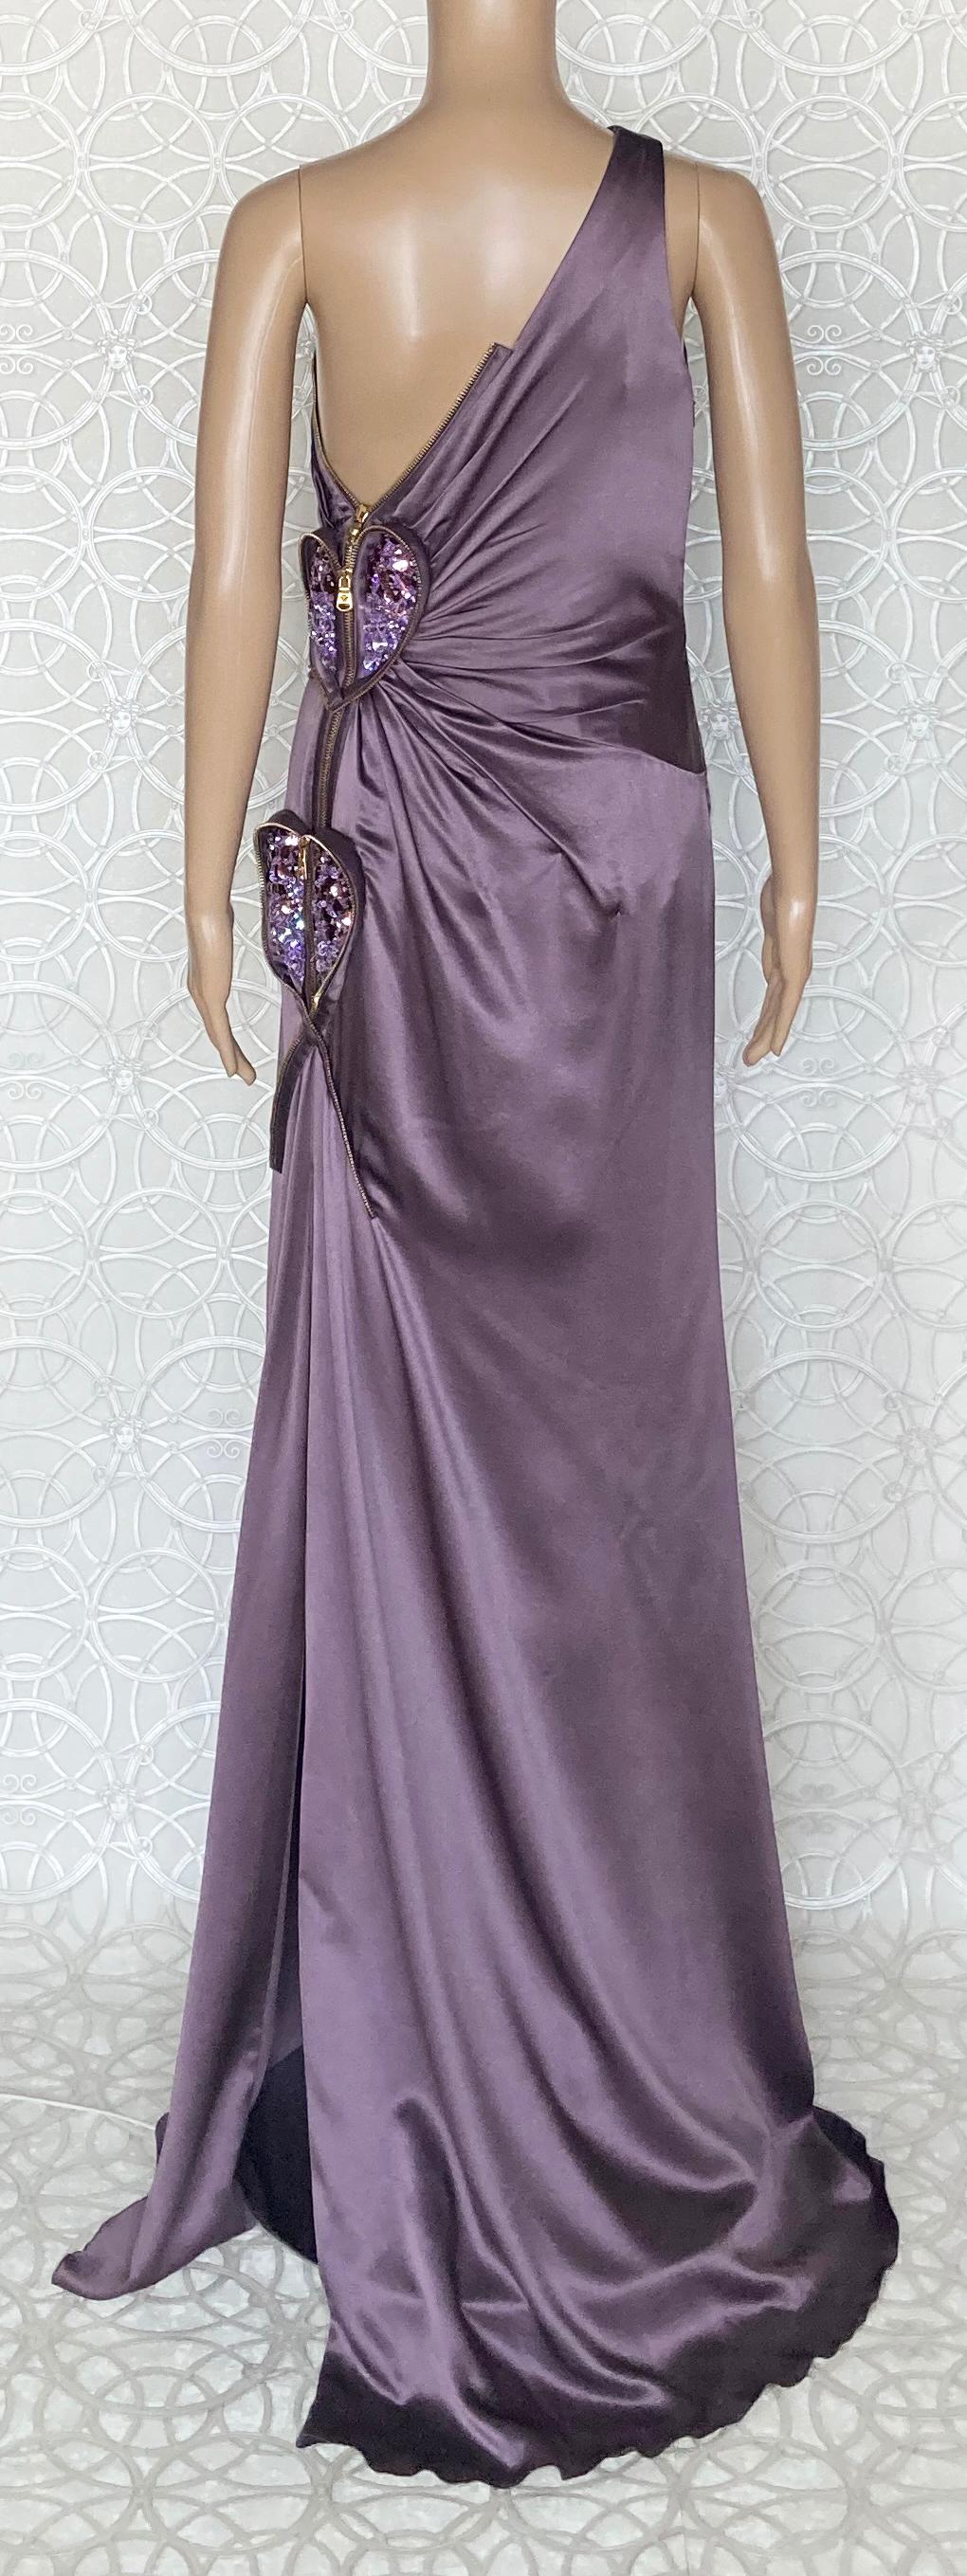 S/S 2009 L# 37 VERSACE ONE SHOULDER PURPLE LONG DRESS GOWN With HEARTS 46 - 10 For Sale 1